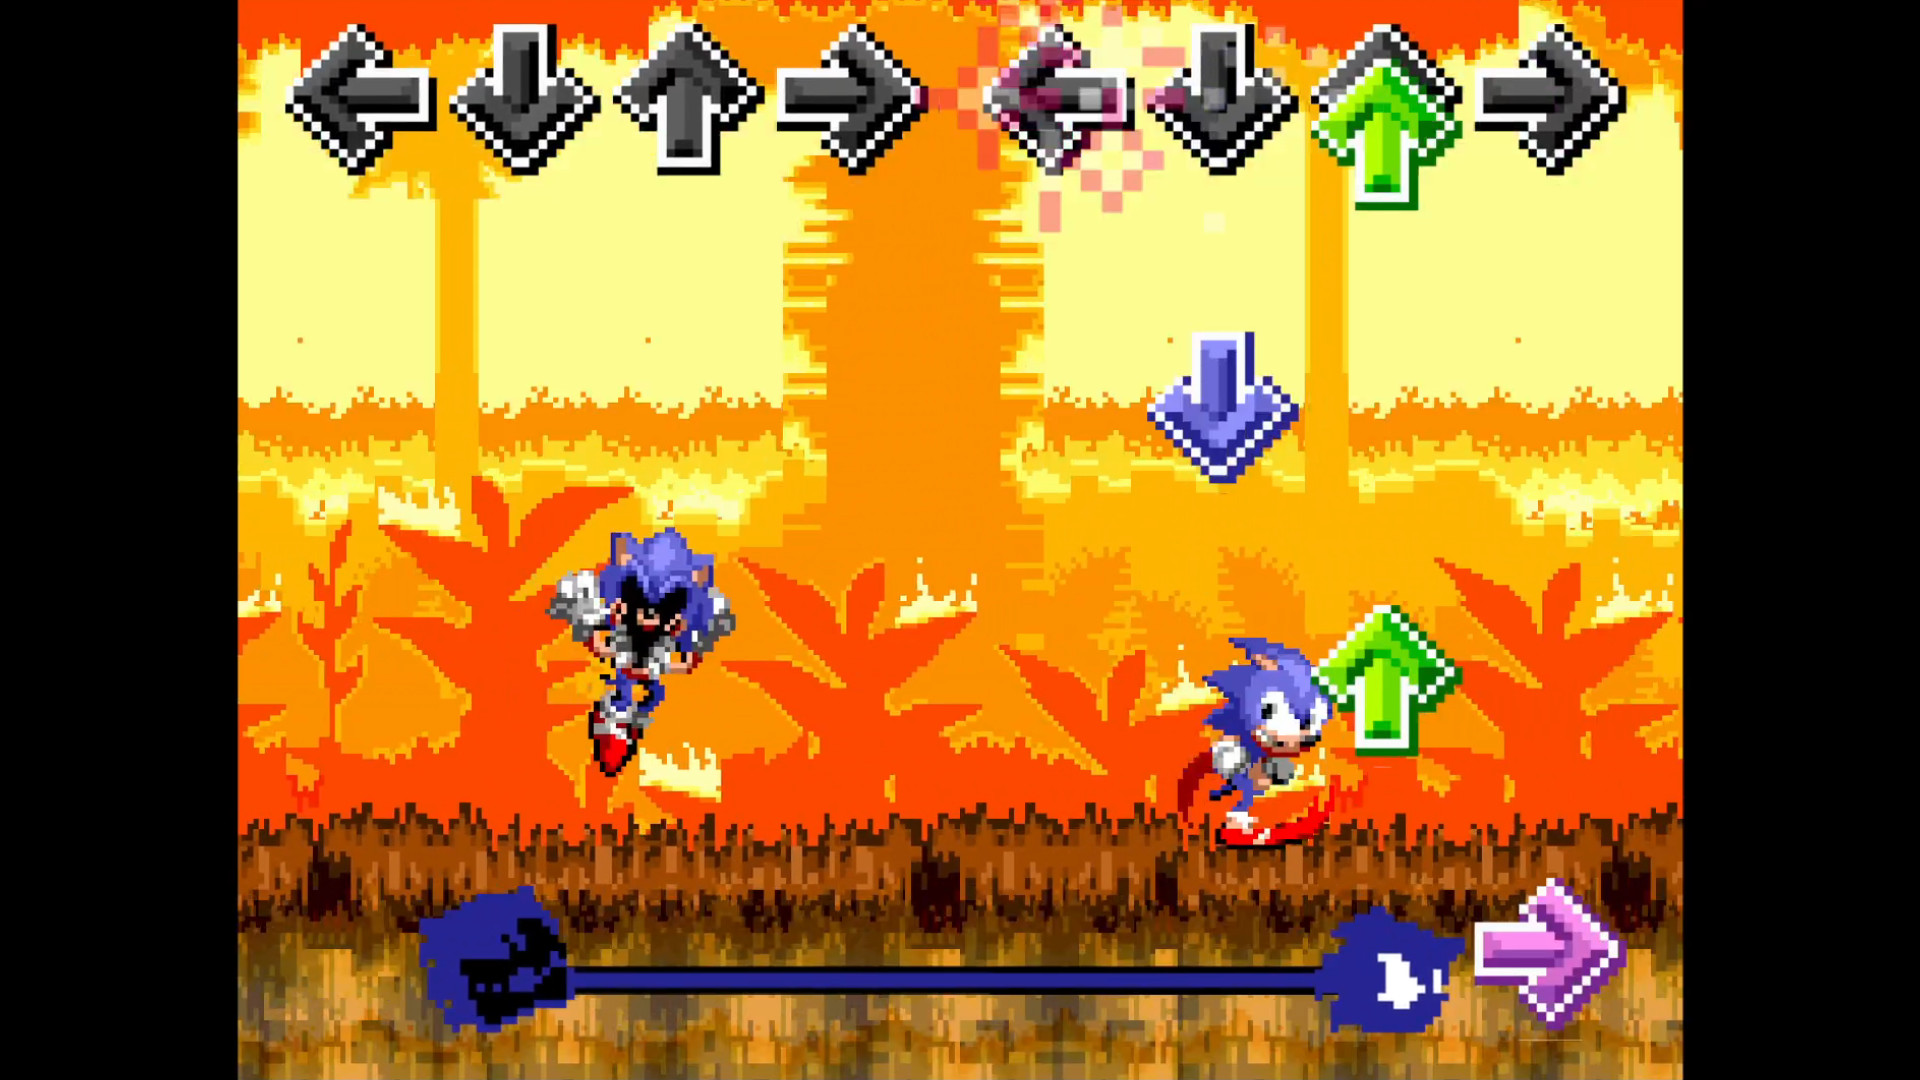 Sonic exe confronting yourself Final Zone download game v2. Confronting yourself fnf sonic